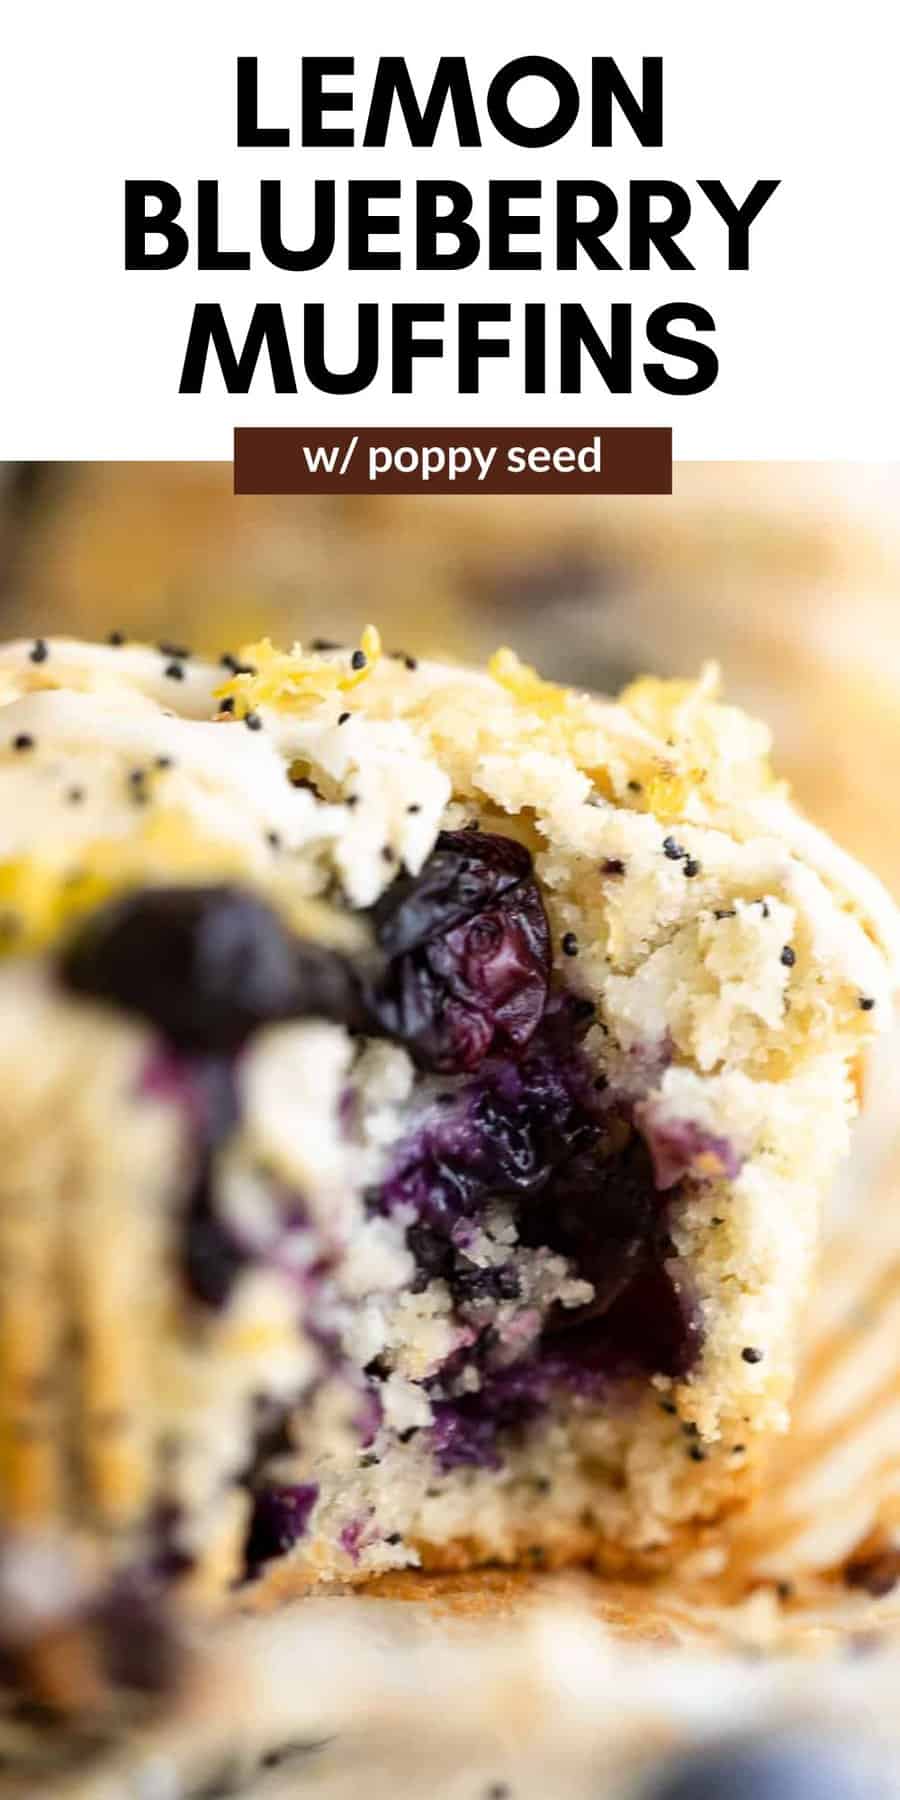 Gluten Free Lemon Blueberry Muffins - Eat With Clarity